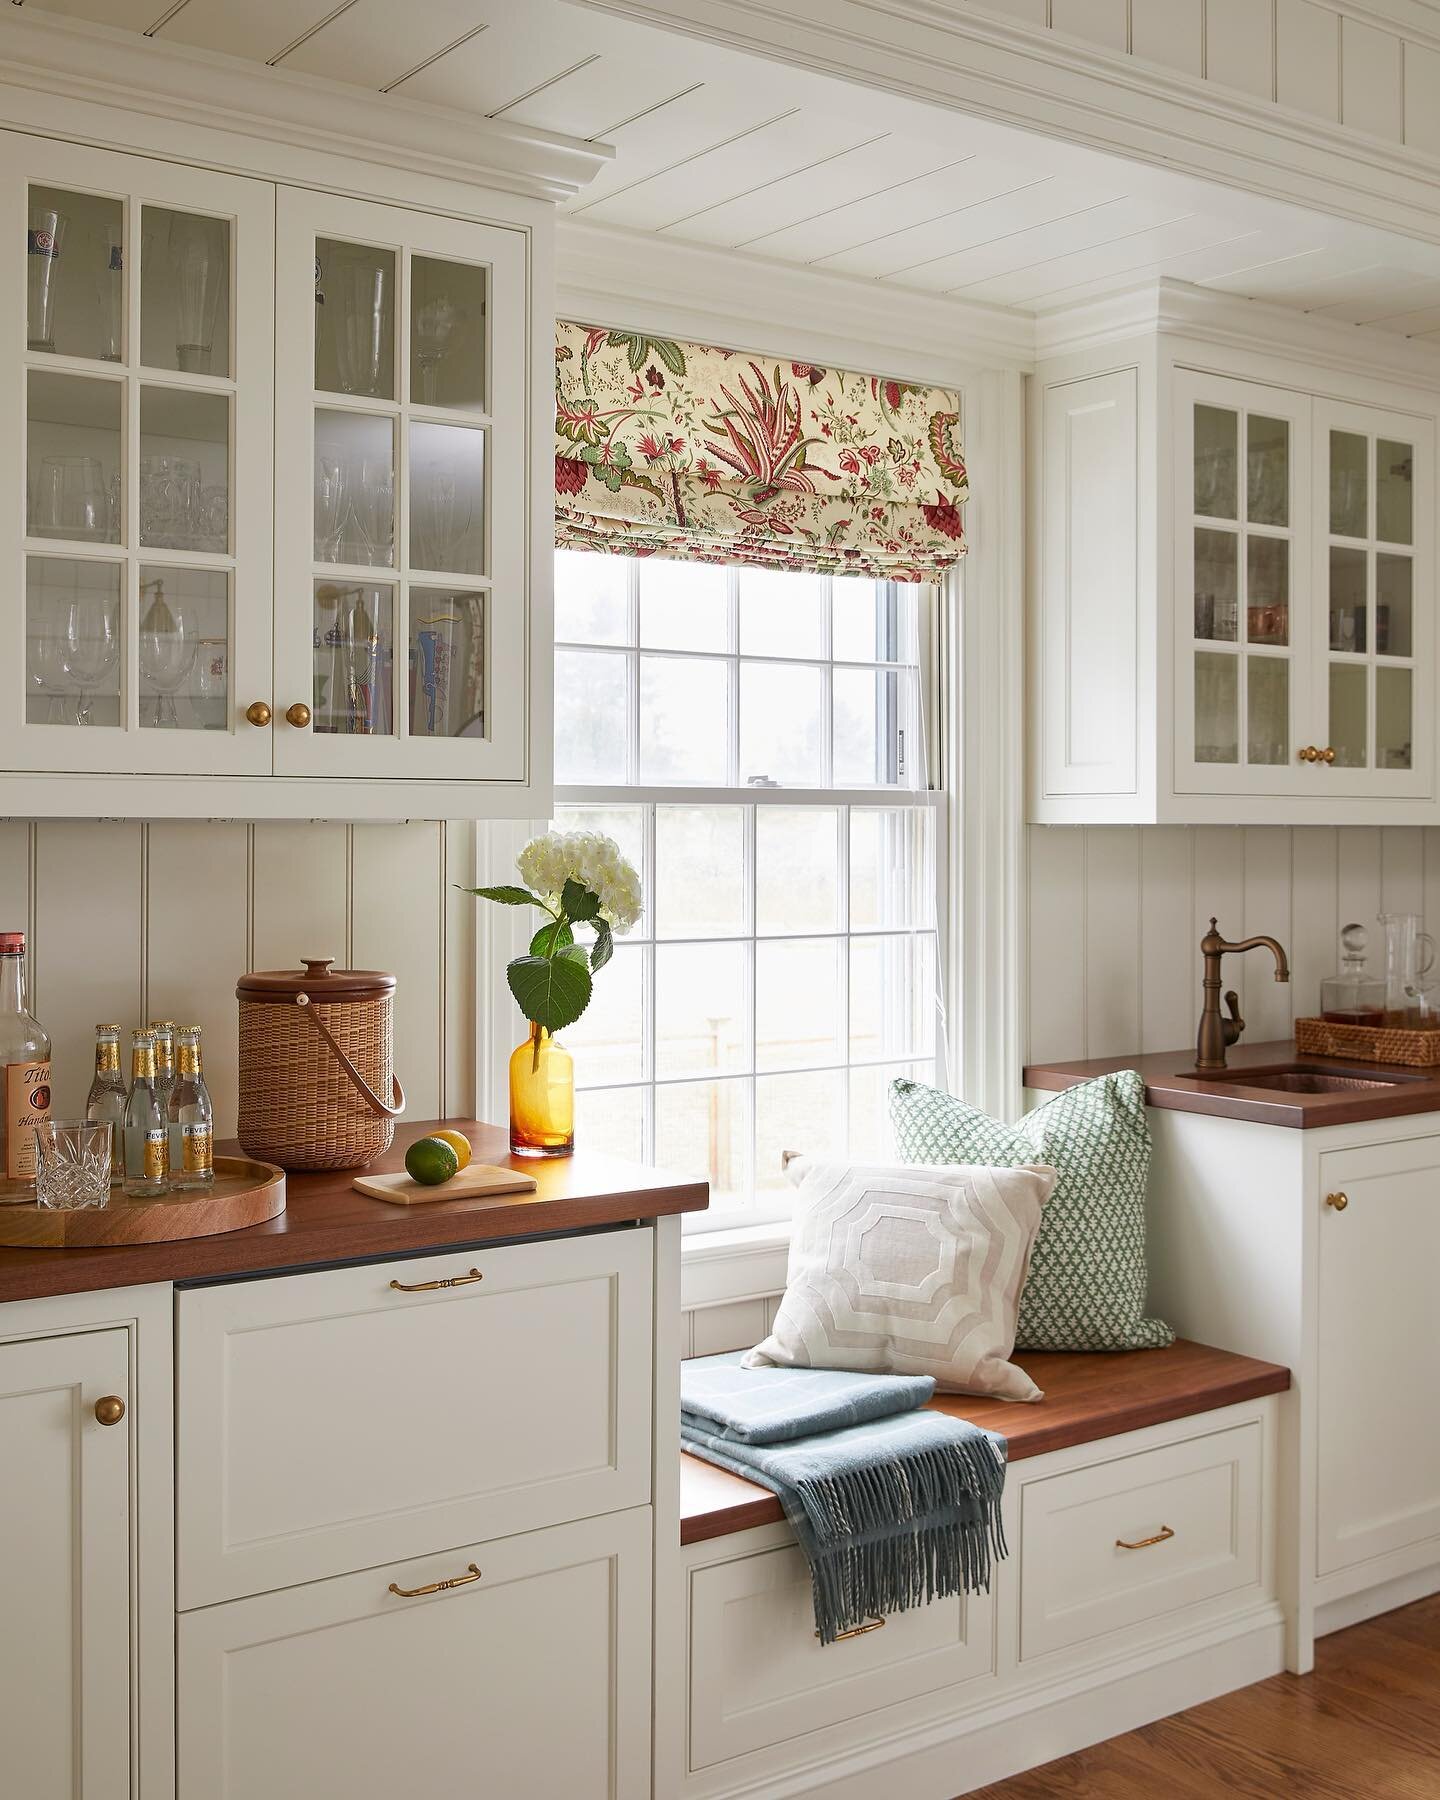 Timeless built ins with a window seat and view 
Photographed for Architectural Designer, Kristin Burkhart 
Styled by Karin Lidbeck @kristinburkhart_ @karinlidbeck @lizdaly_photographer

#builtin #customcabinetry #newenglandhome #interiorstyling #inte